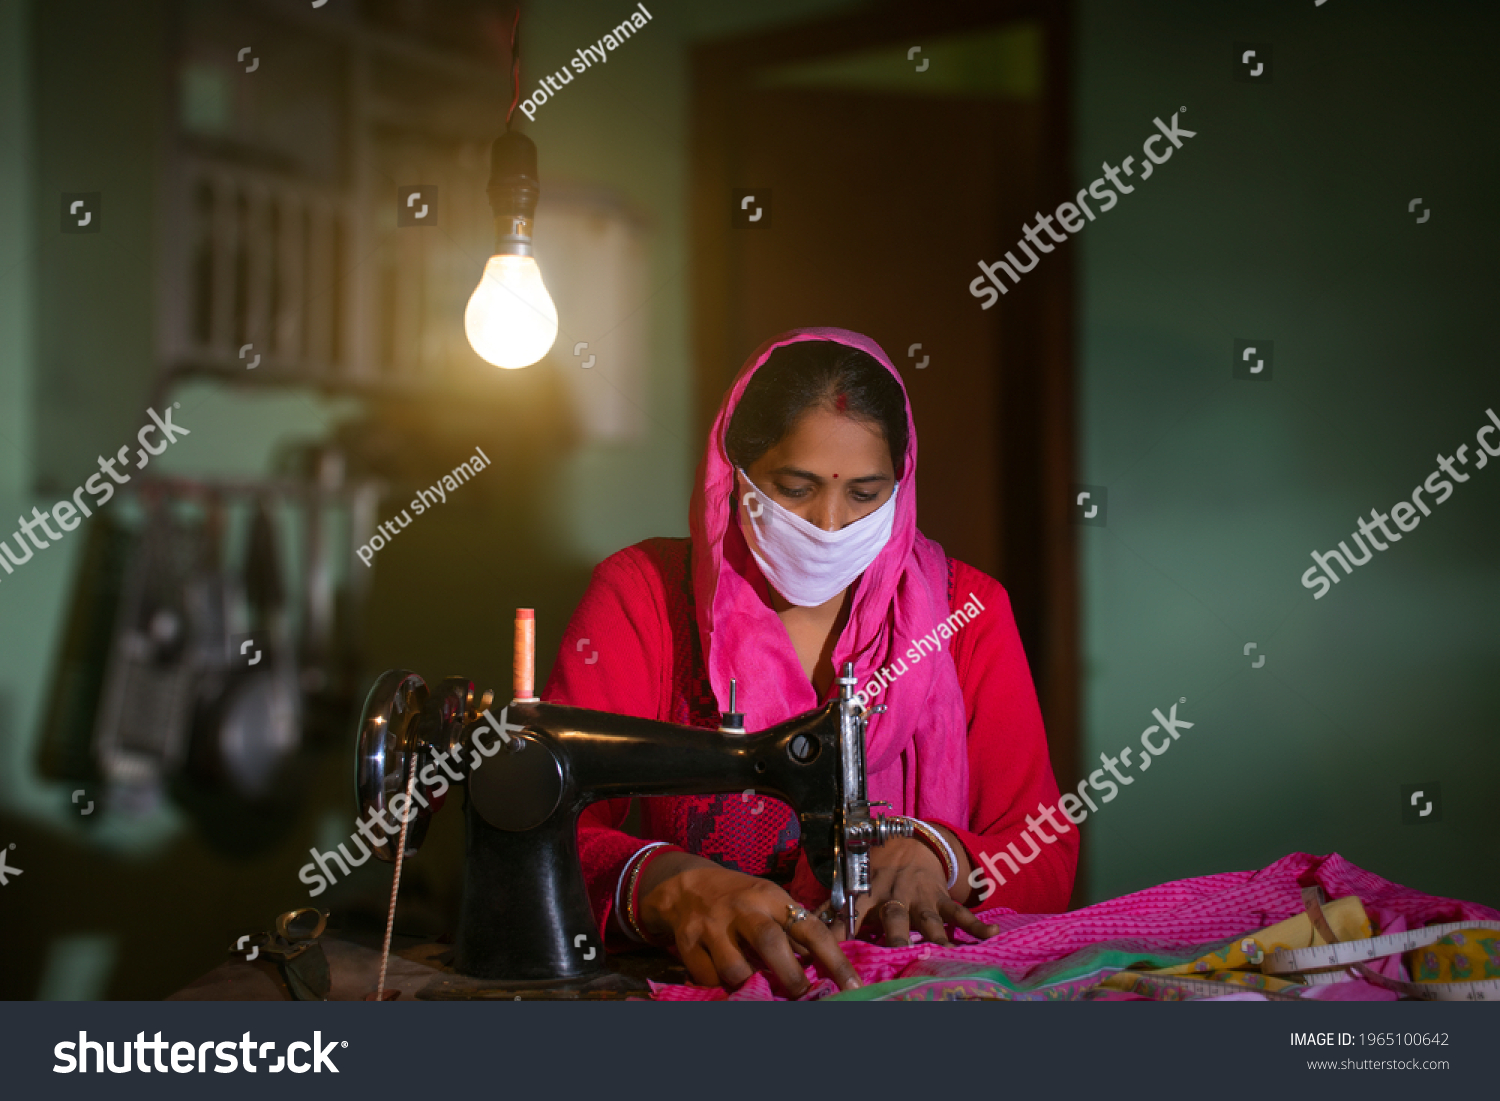 PORTRAIT OF A RURAL WOMAN WEARING MASK AND SEWING CLOTHES
 #1965100642